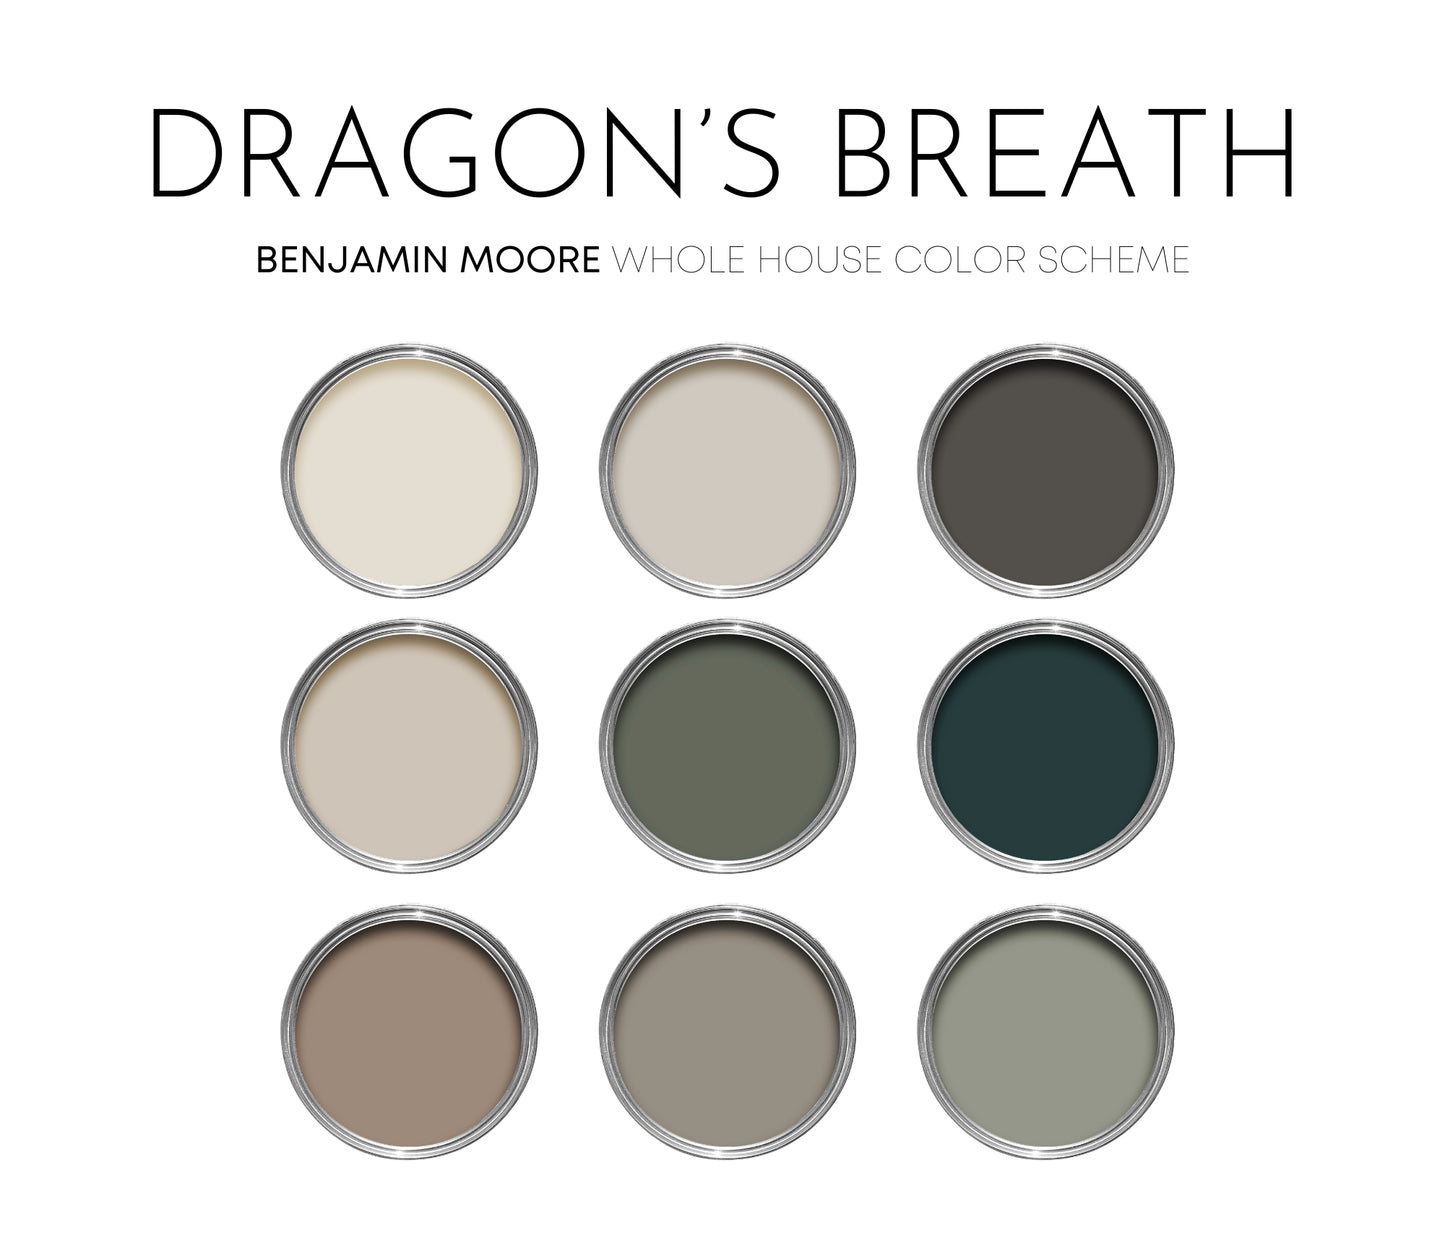 Dragon's Breath Benjamin Moore Paint Palette, Color of the Year Palette, Warm Neutral Colors for Home, Lake House, Smokey Taupe